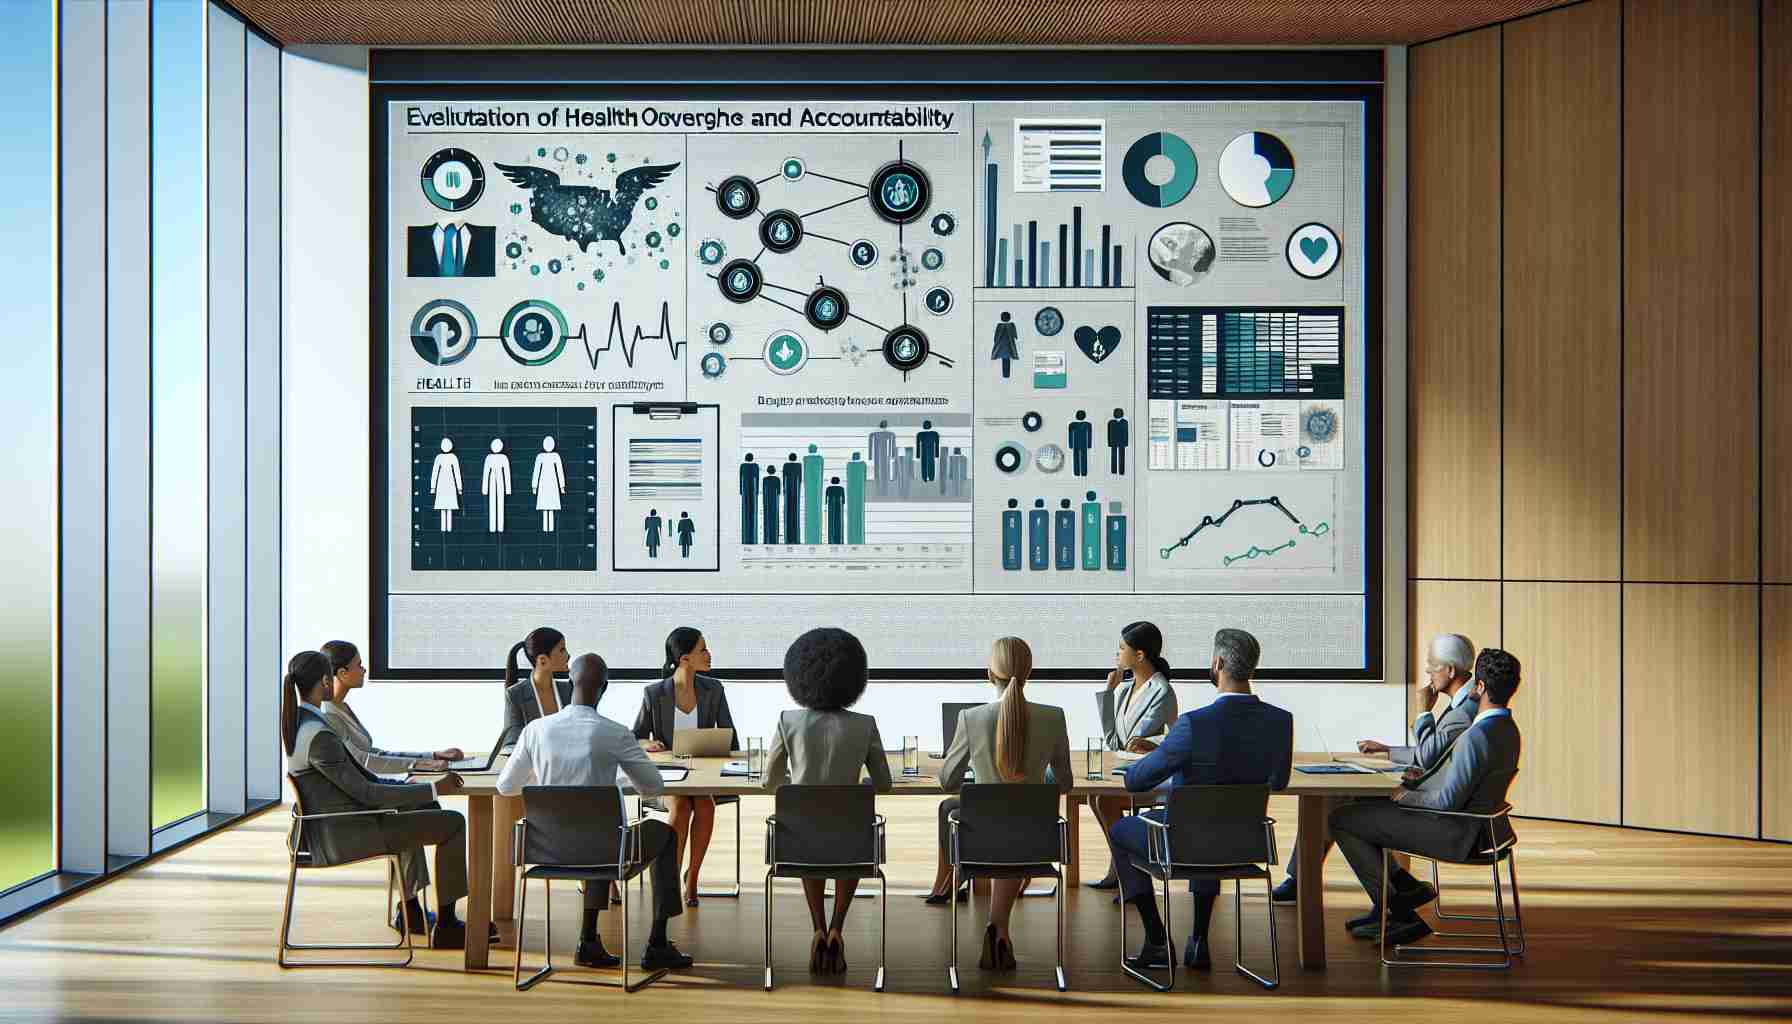 Generate a high-definition, realistic image representing the evaluation of healthcare oversight and accountability. Visualize a group of diverse professionals attentively examining a large diagram of a healthcare system. There may be graphs showing health outcomes and budgets, binders with policies and regulations, and digital devices running analytic software. Include representation of different genders and descents such as a Caucasian female, a Black male, a Middle-Eastern female, and a Hispanic male. The setting is a modern, well-lit meeting room.